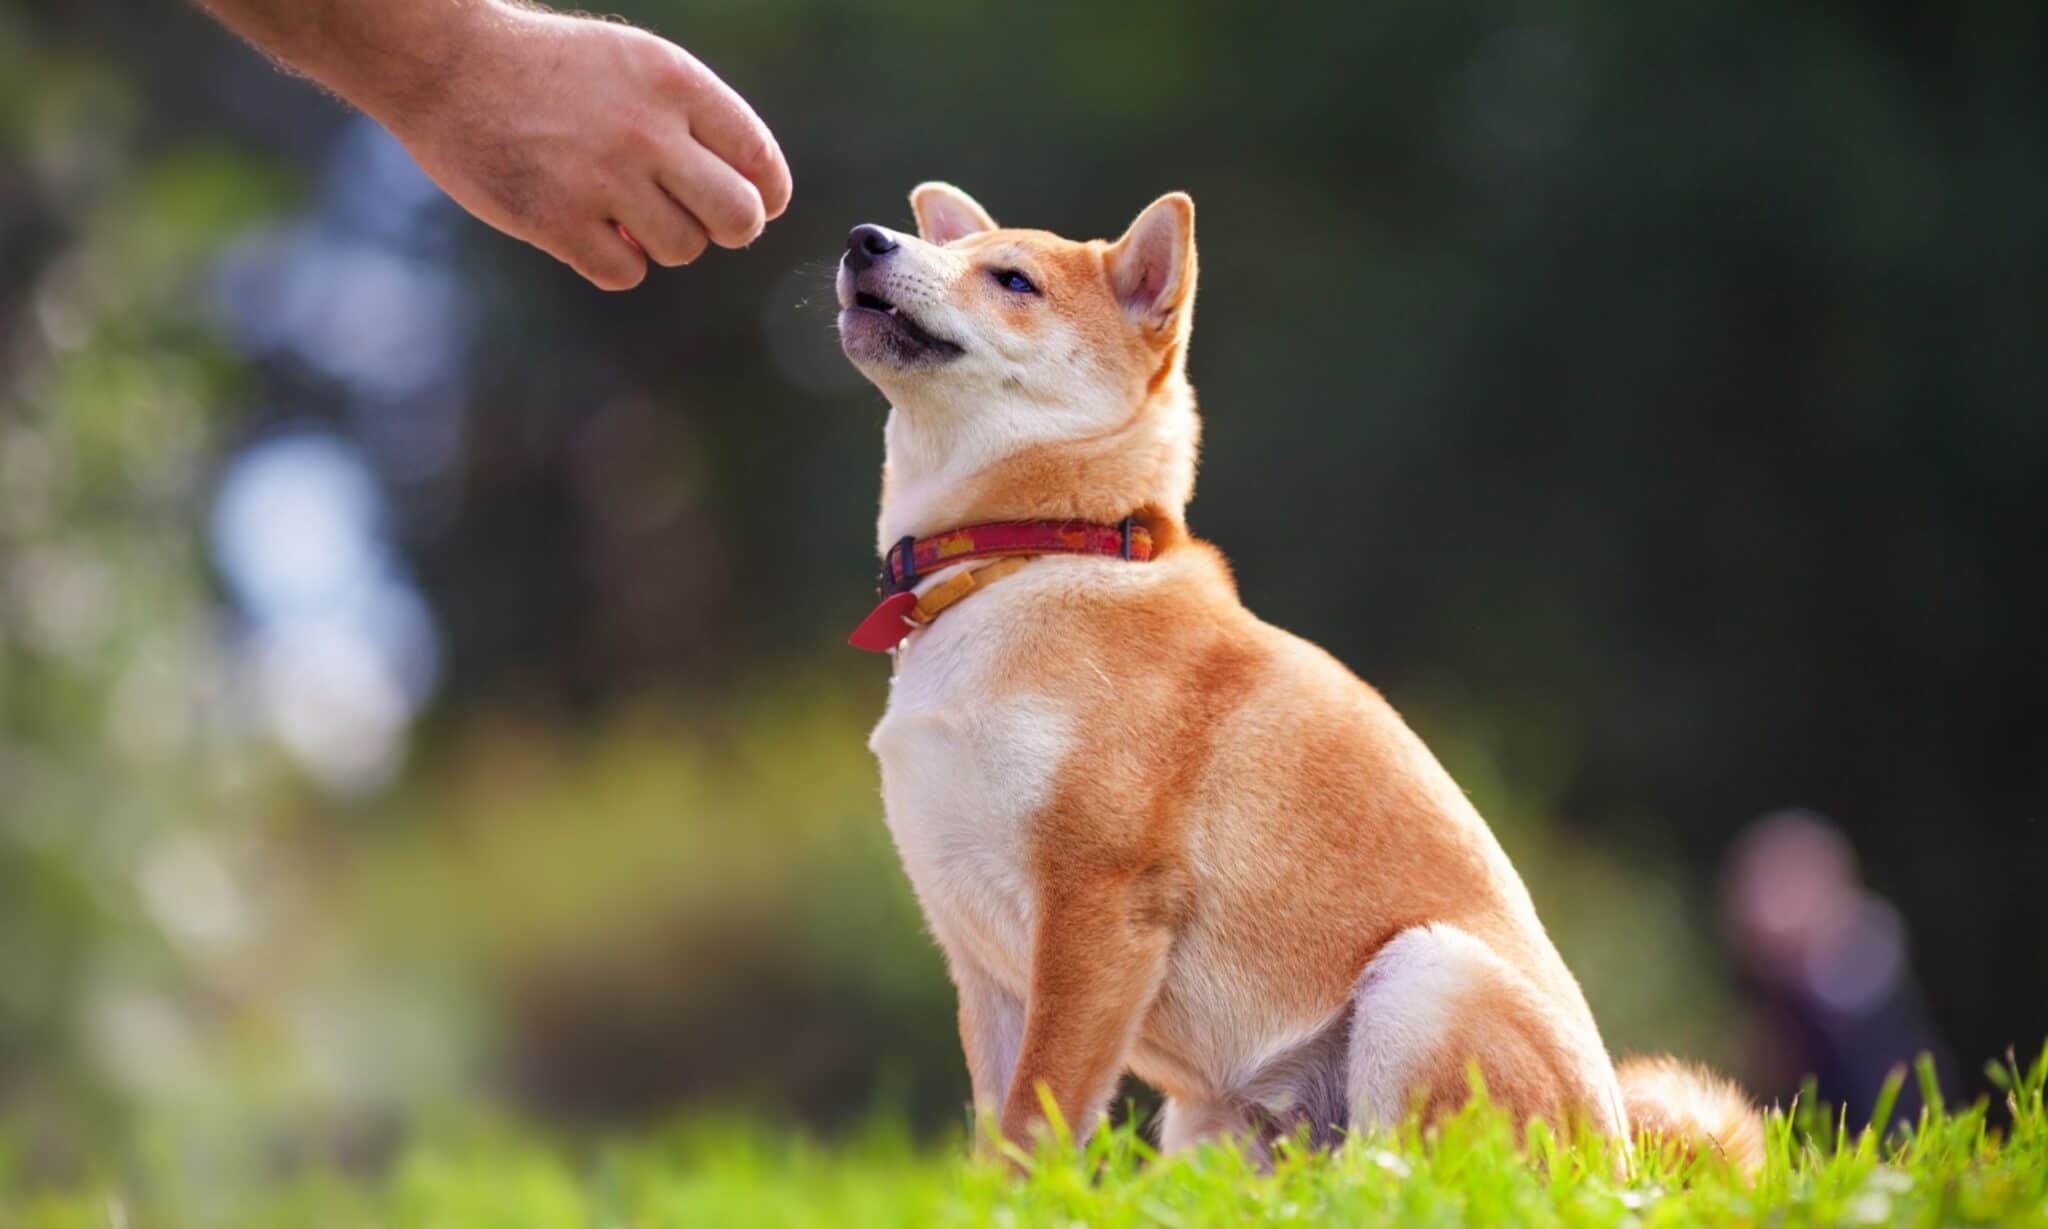 Basic Dog Obedience Training: How To Start